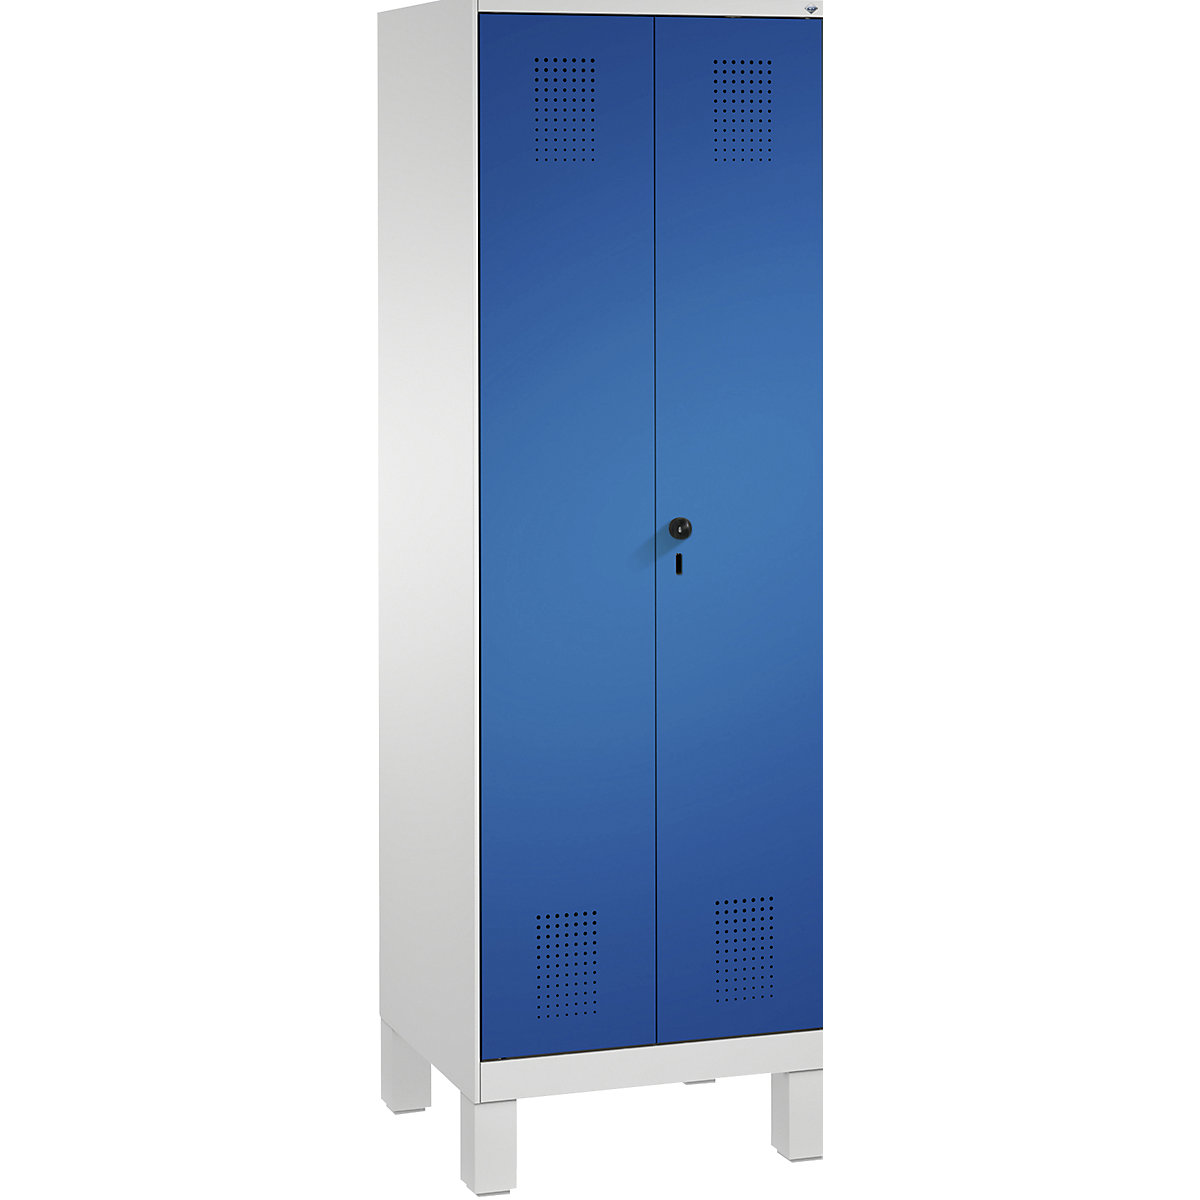 EVOLO storage cupboard, doors close in the middle, with feet – C+P, 2 compartments, 8 shelves, compartment width 300 mm, light grey / gentian blue